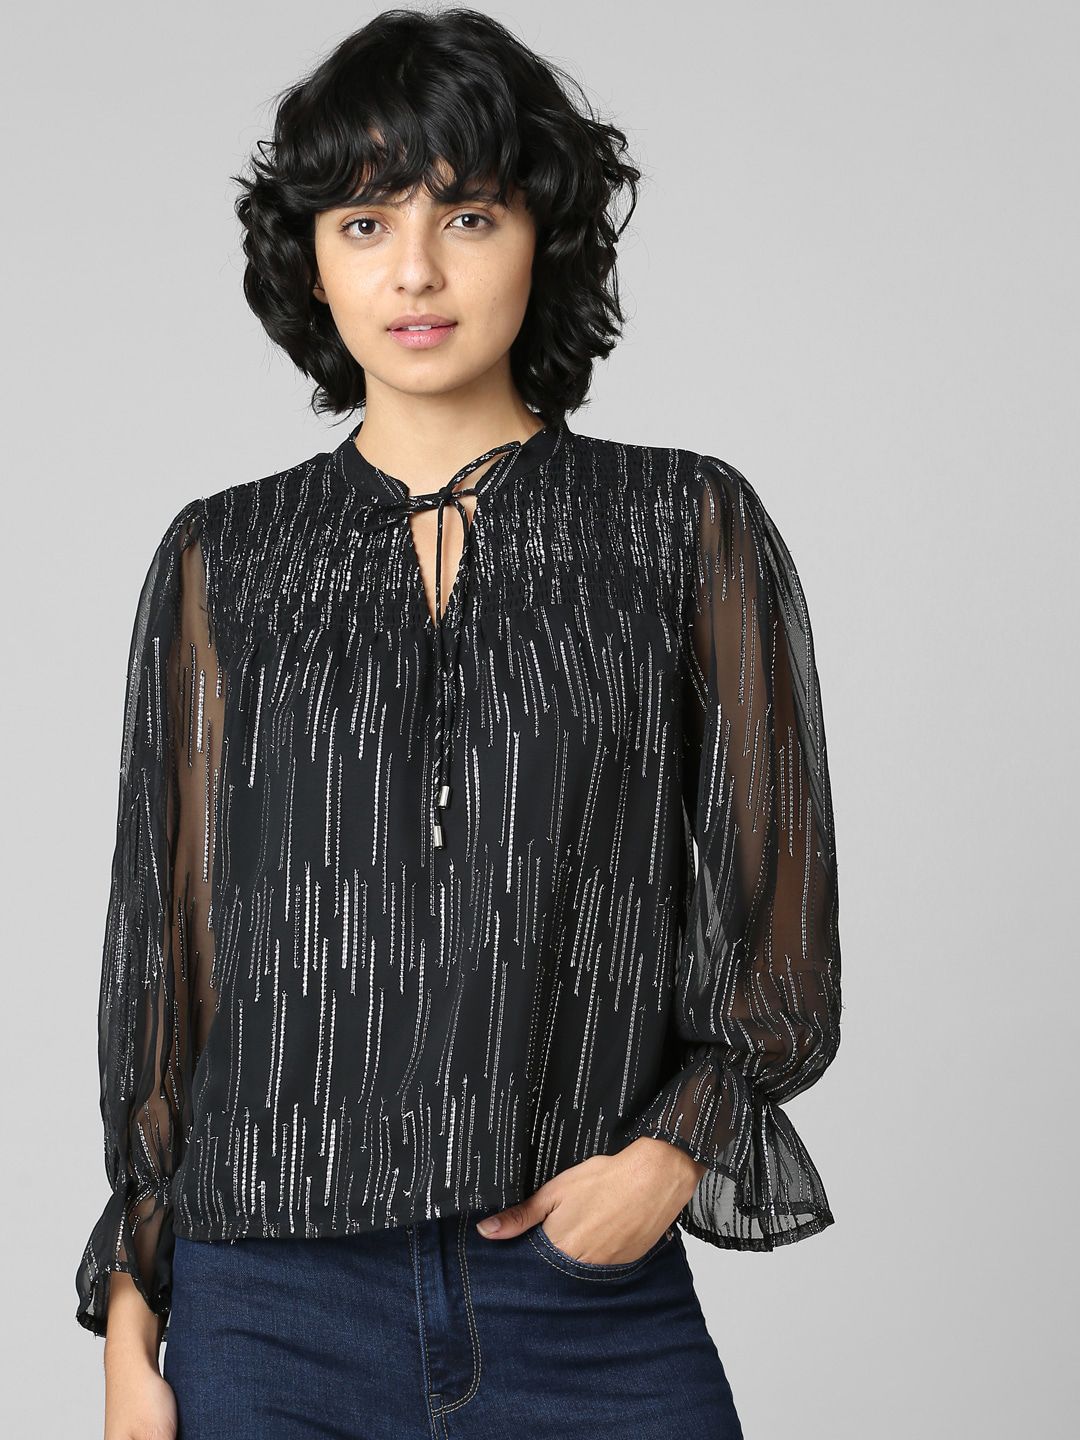 ONLY Black & Silver Geometric Printed Tie-Up Neck Top Price in India